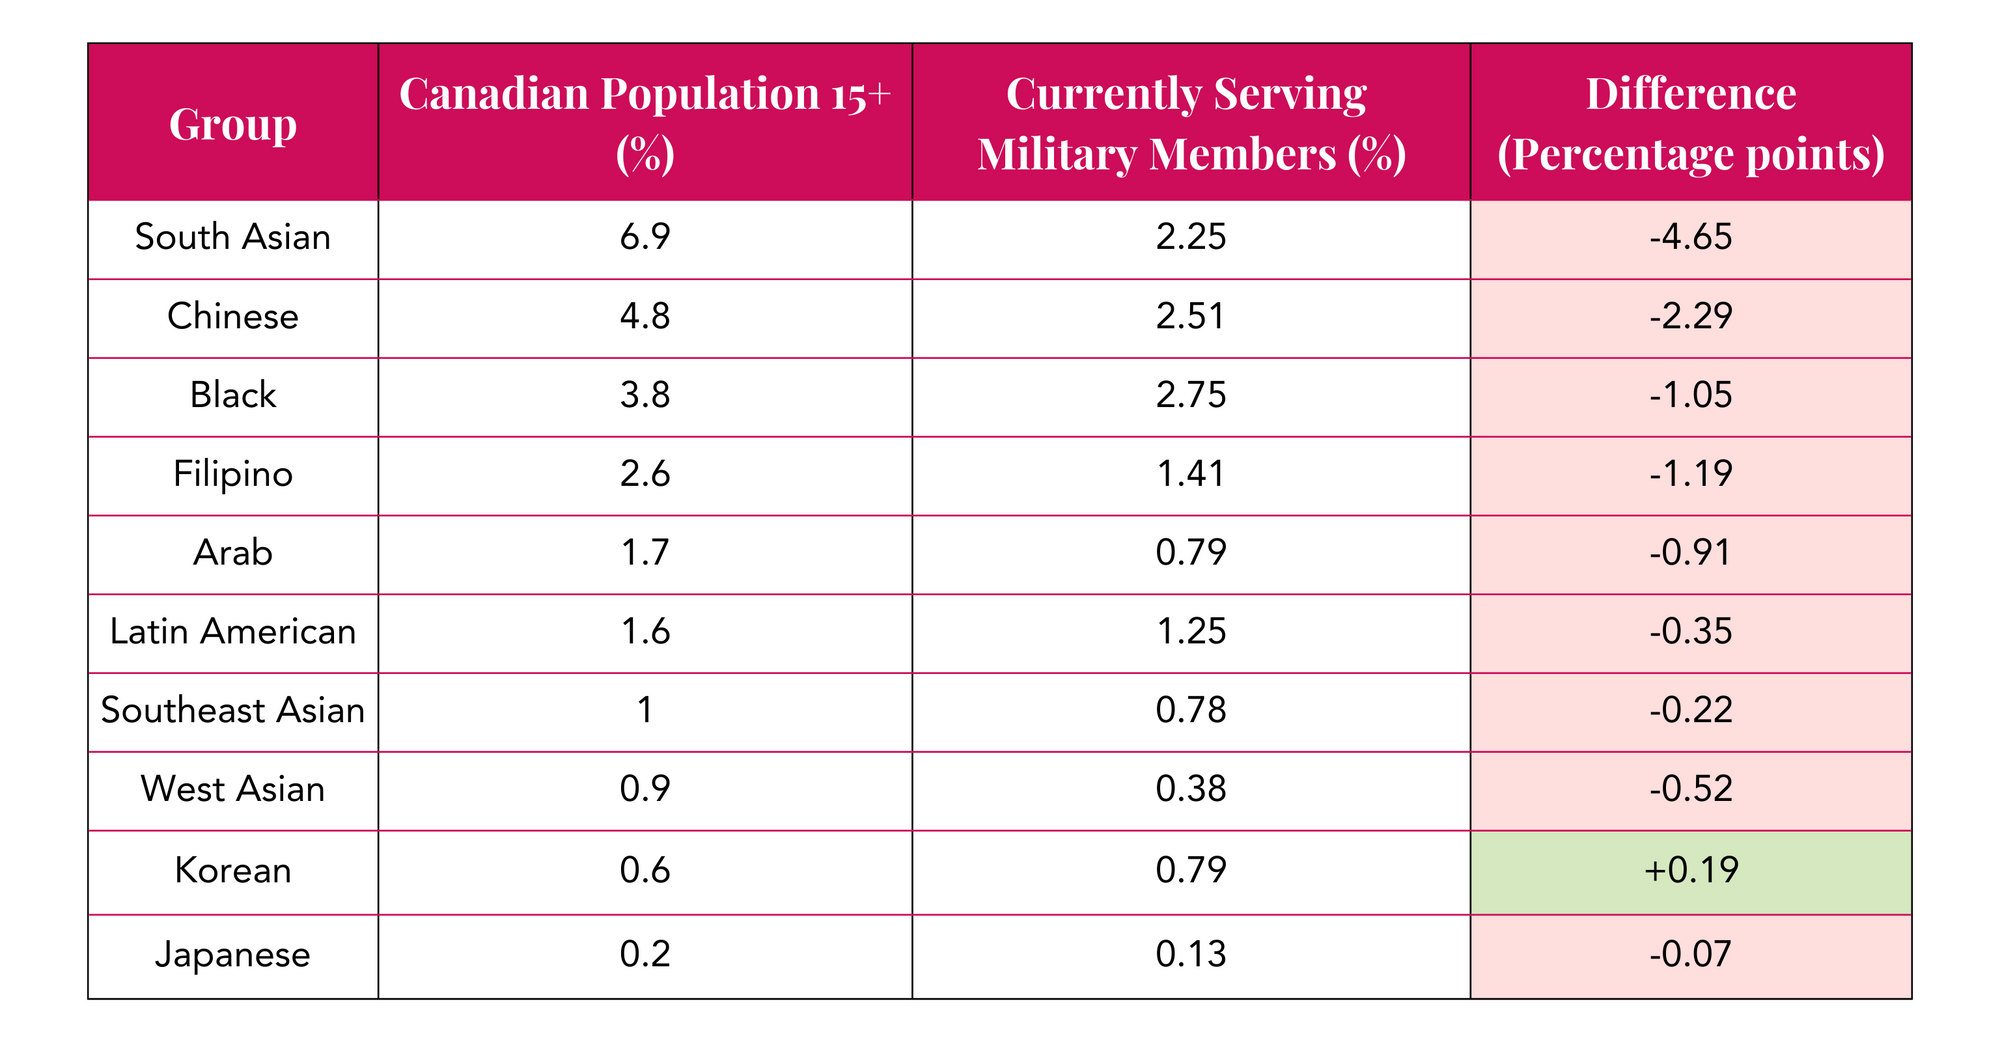 Group Canadian Population 15+ (%) Currently Serving Military Members (%) Difference (Percentage points) South Asian 6.9 2.25 -4.65 Chinese 4.8 2.51 -2.29 Black 3.8 2.75 -1.05 Filipino 2.6 1.41 -1.19 Arab 1.7 0.79 -0.91 Latin American 1.6 1.25 -0.35 Southeast Asian 1 0.78 -0.22 West Asian 0.9 0.38 -0.52 Korean 0.6 0.79 +0.19 Japanese 0.2 0.13 -0.07